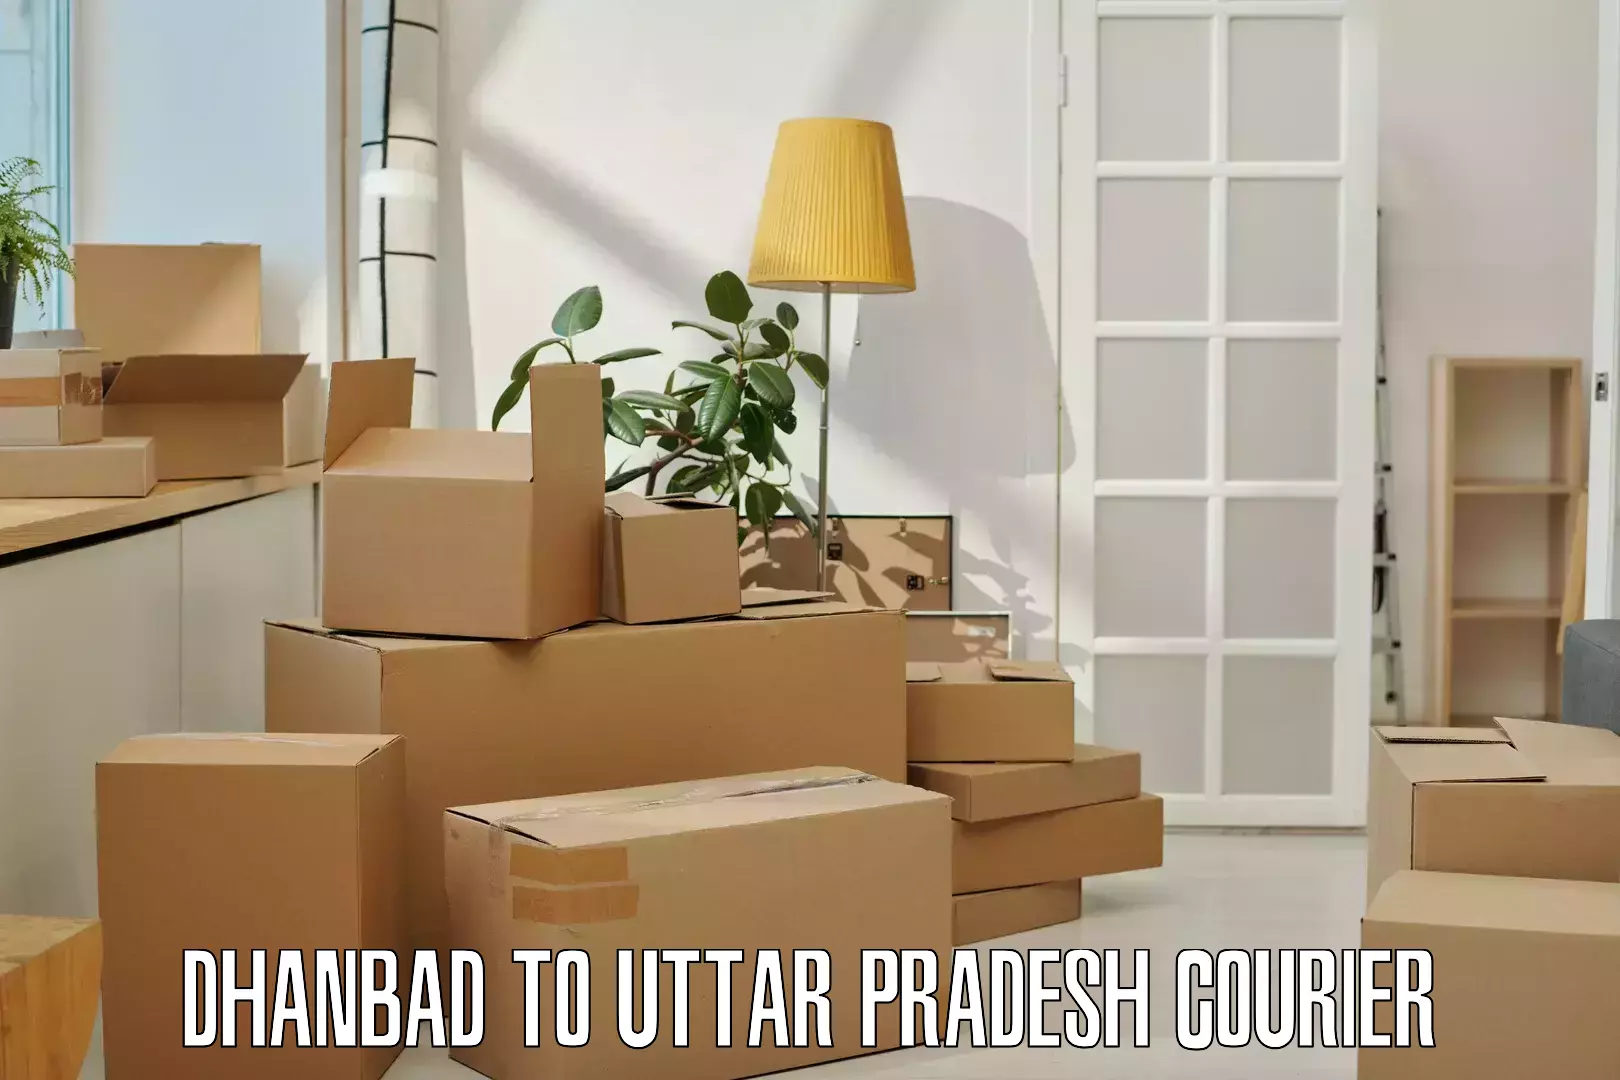 Seamless shipping experience Dhanbad to Bakewar